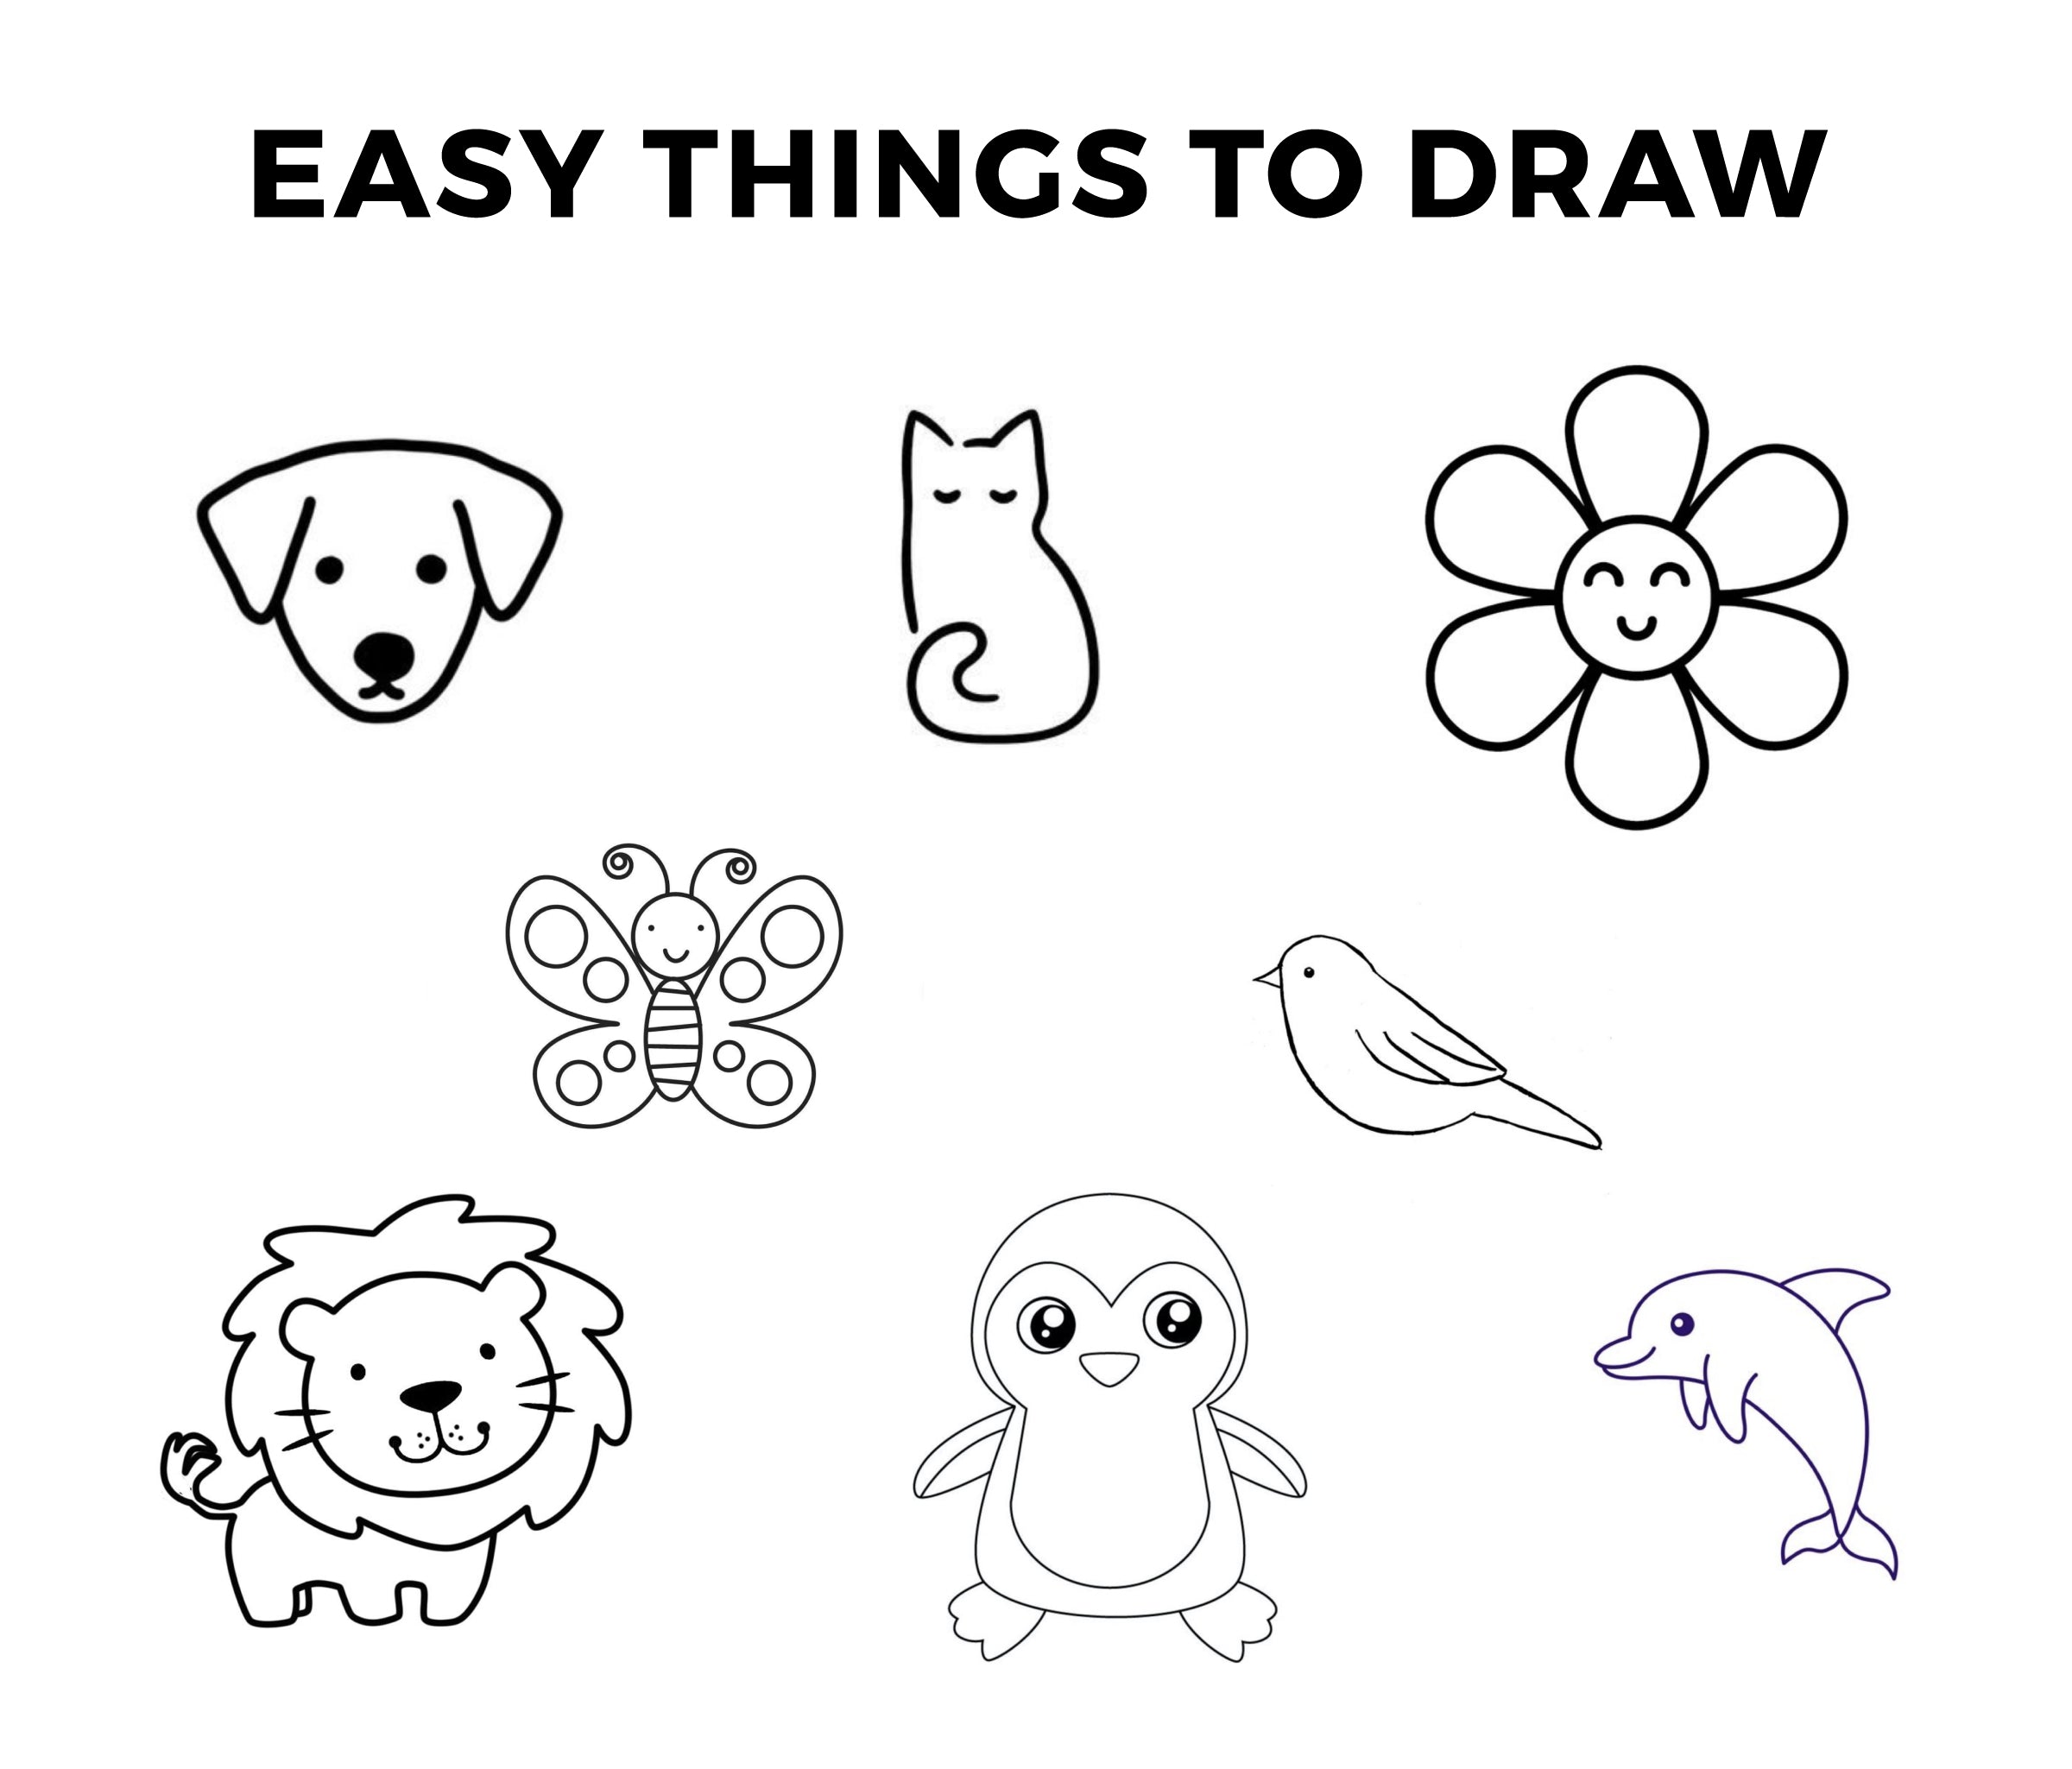 20 Easy drawing ideas anyone (including you) can try today! | The Art and  Beyond